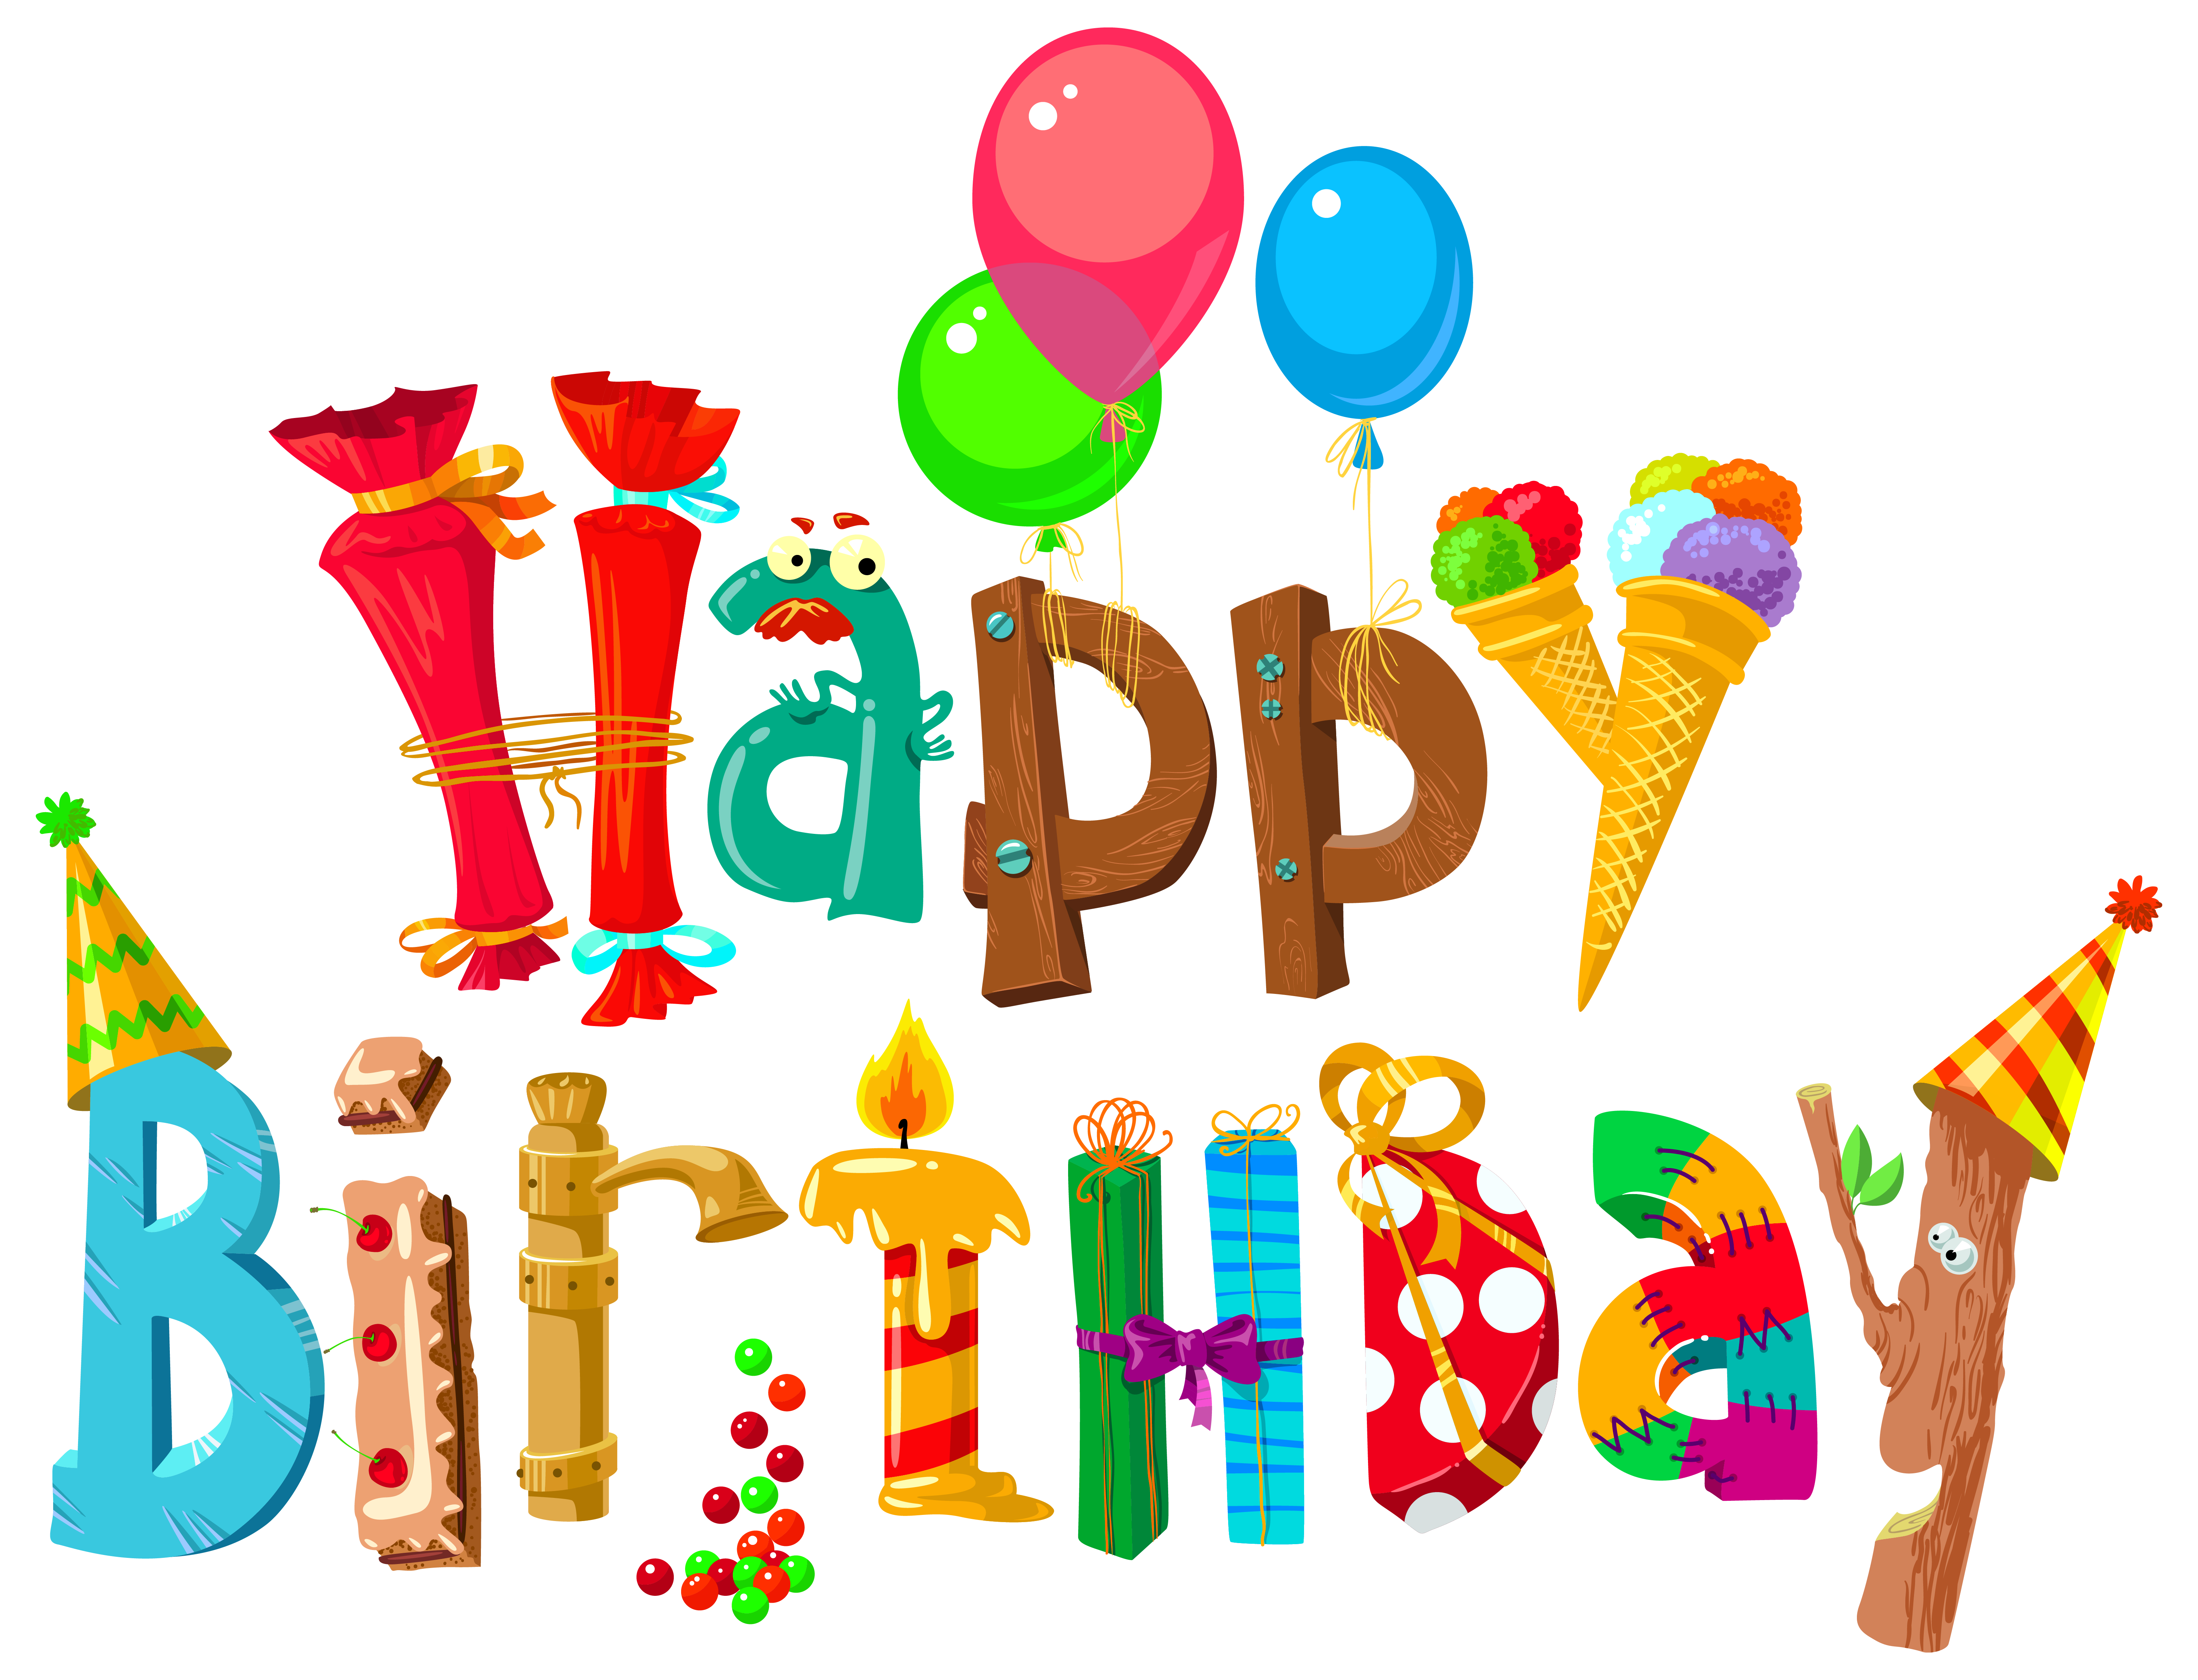 Free Birthday Cliparts Funny, Download Free Clip Art, Free ...